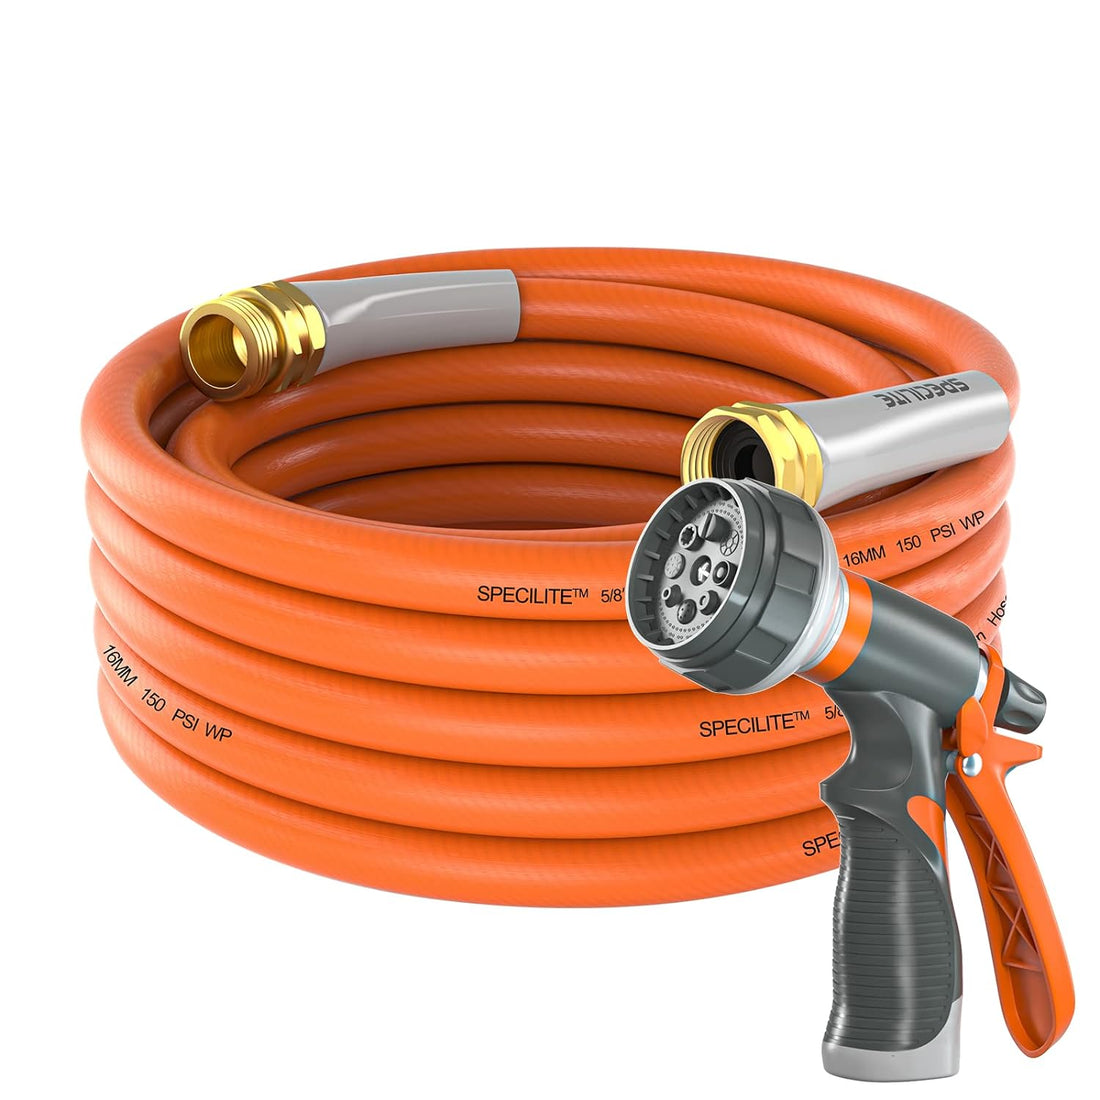 SPECILITE Garden Hose 25 ft x 5/8 in Heavy Duty, Flexible and Lightweight Water Hose with Nozzle, Burst 600 psi, Kink-less Hybrid Rubber Hose for Backyard, 3/4'' Brass Fittings